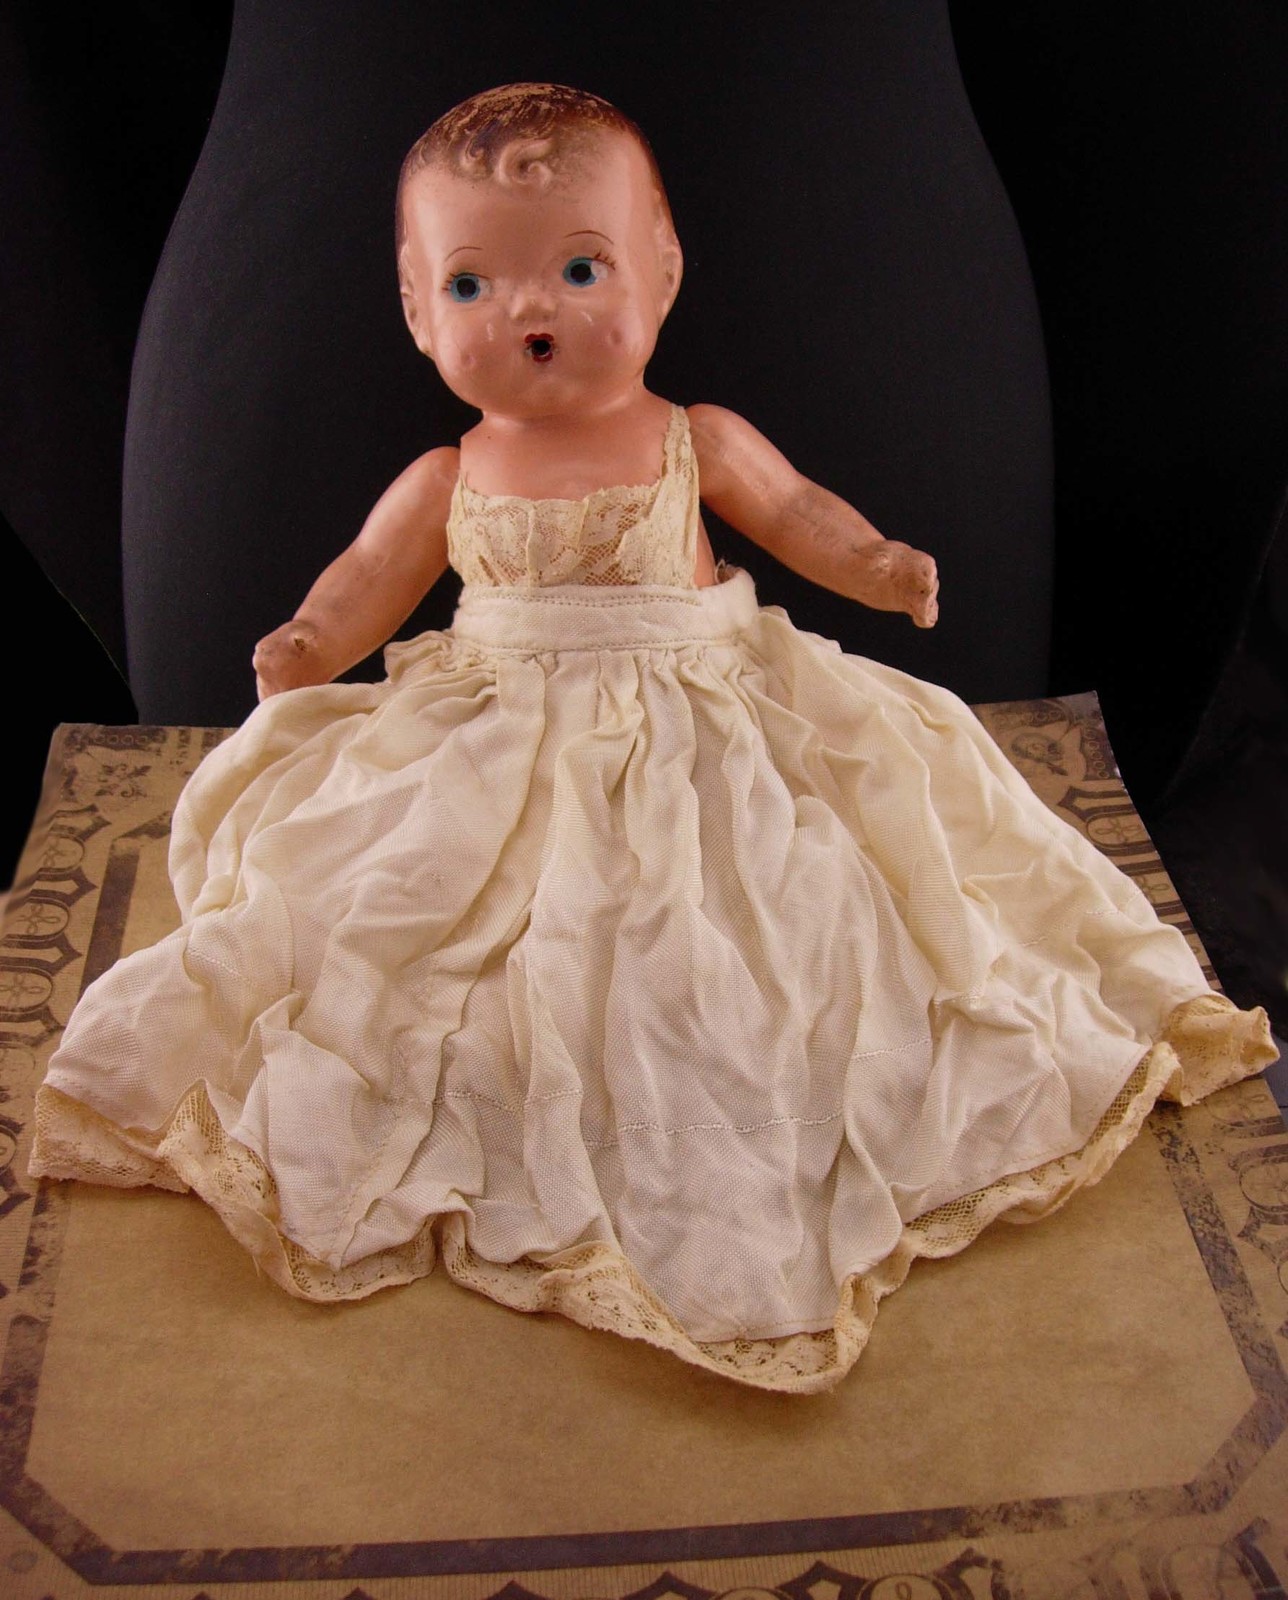 Primary image for Antique 1920's composition open mouth baby Doll - vintage 9" jointed creepy doll